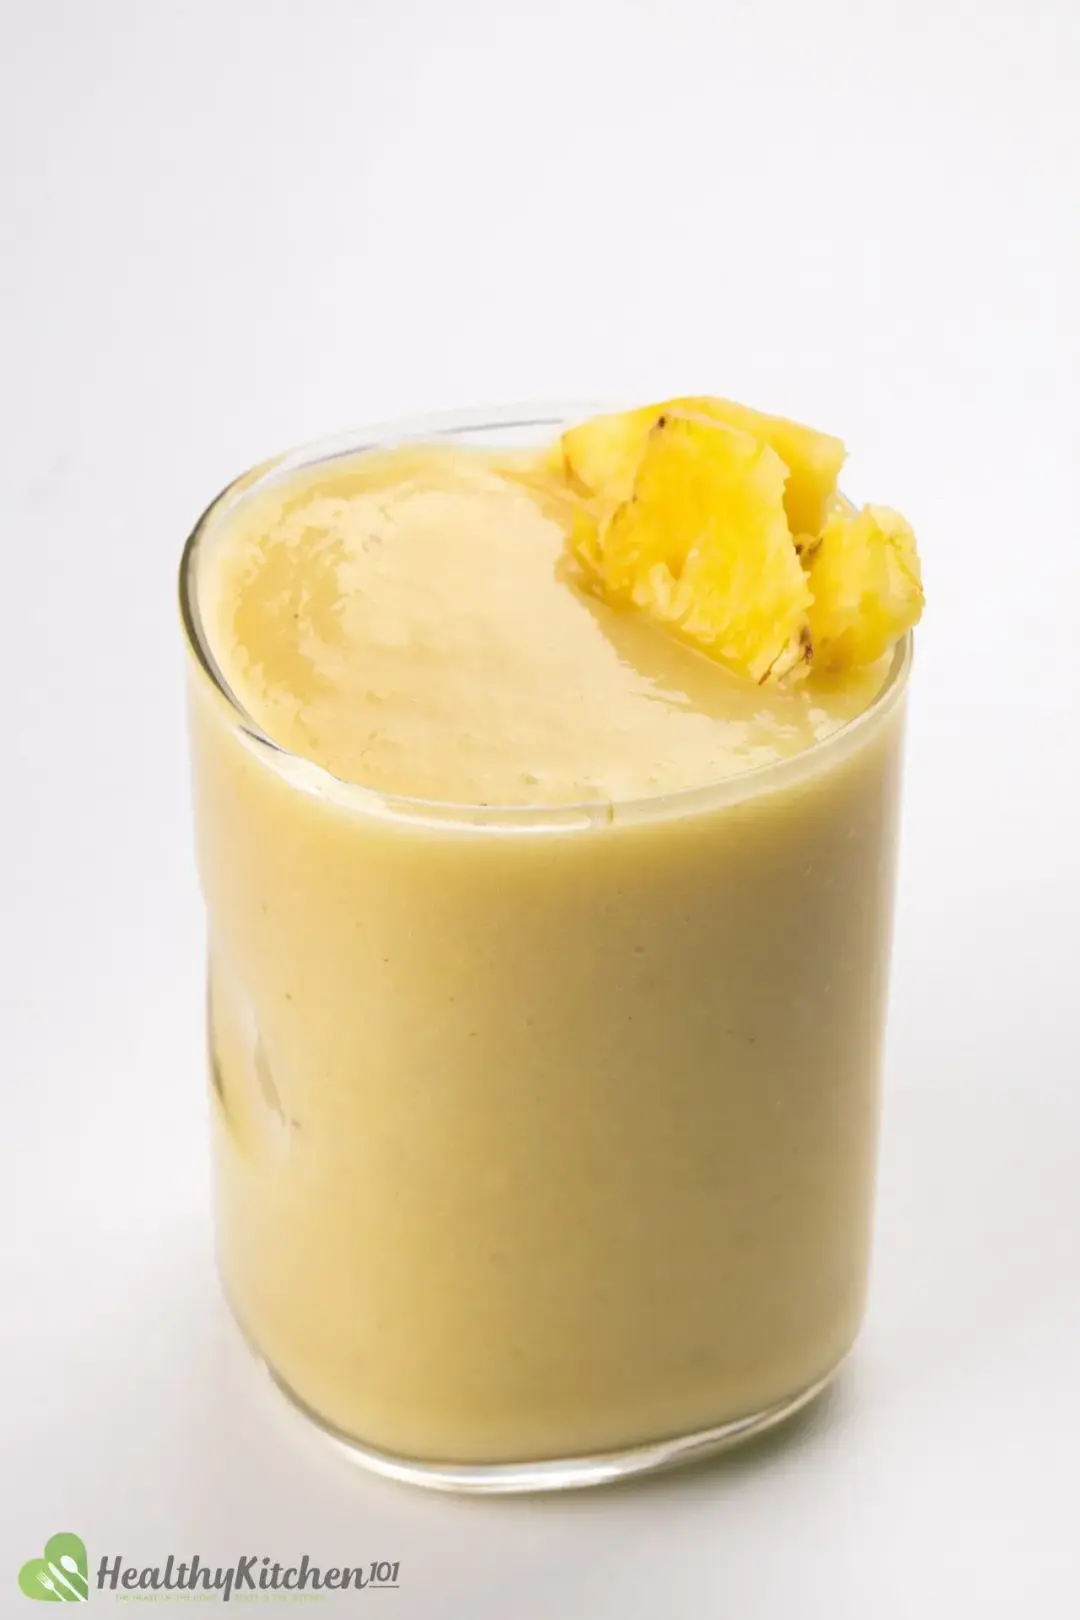 Home made Pineapple Smoothie Recipe